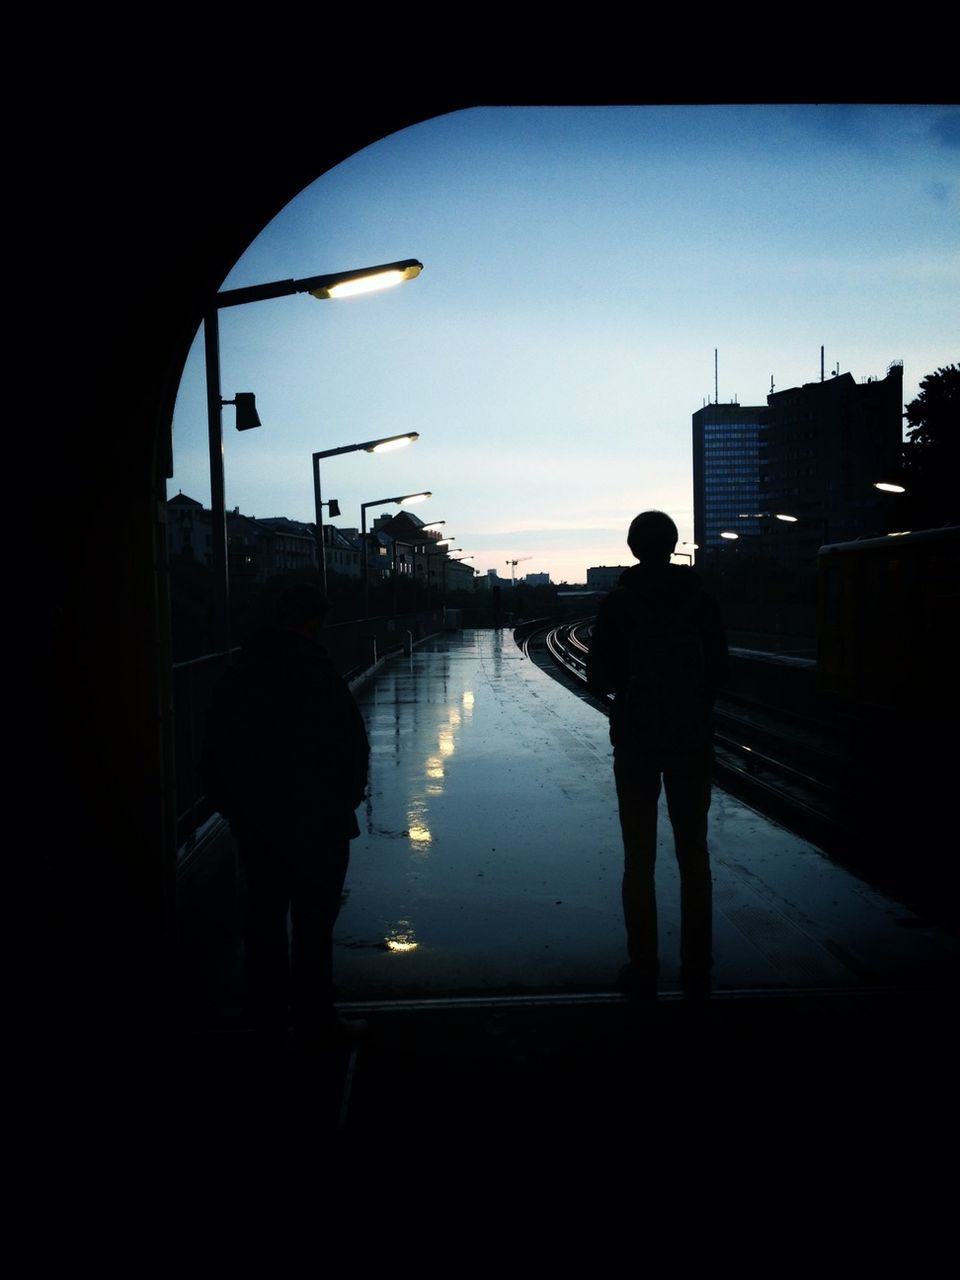 Silhouette of two person standing on railway station platform